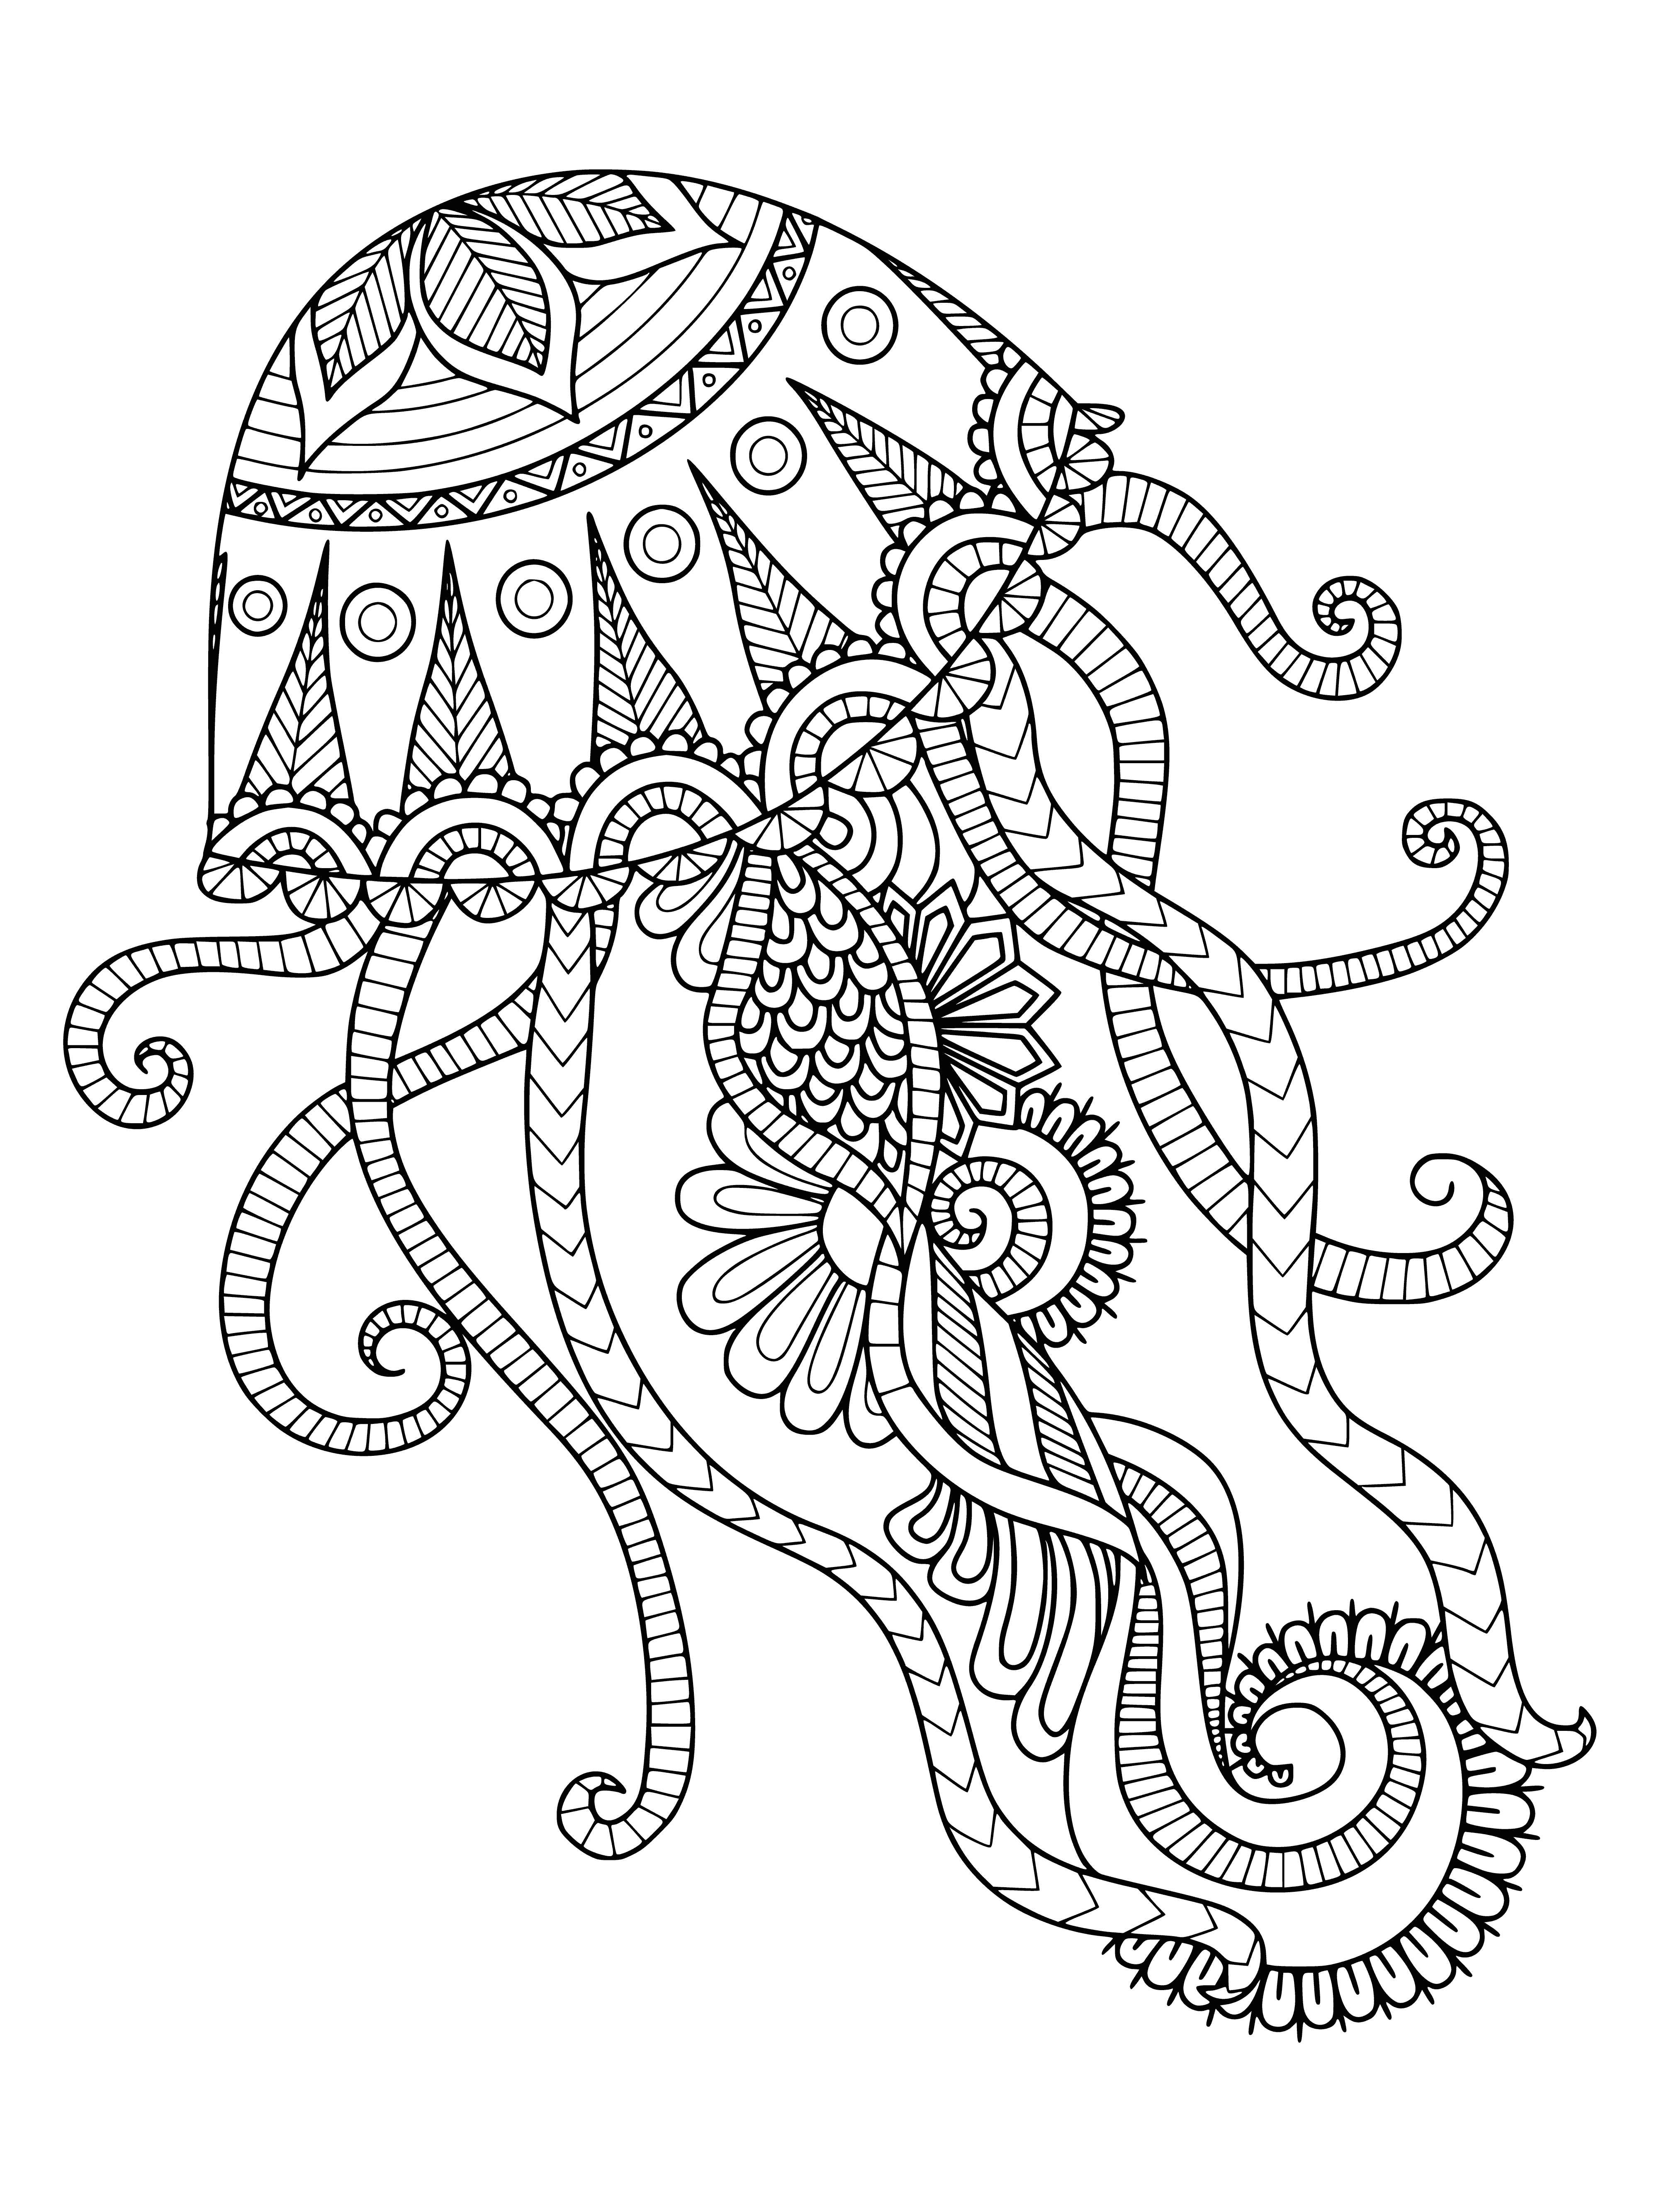 coloring page: Coloring page of many jellyfish of varying sizes and colors with both transparent and opaque bodies, and long tentacles. #coloringpage #jellyfish